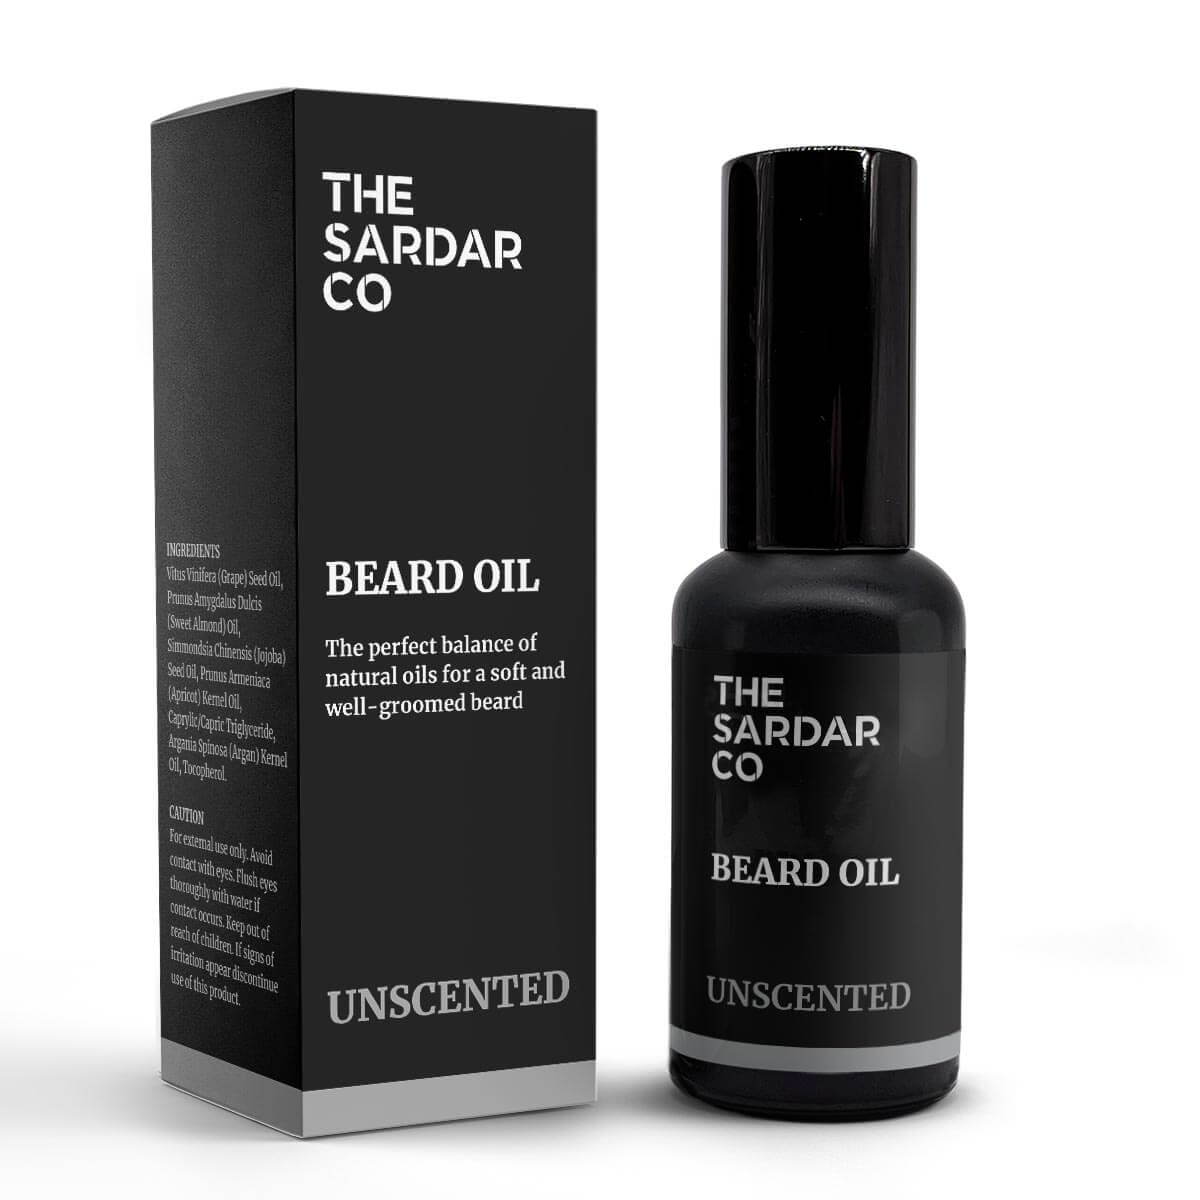 the sardar co unscented beard oil packaging